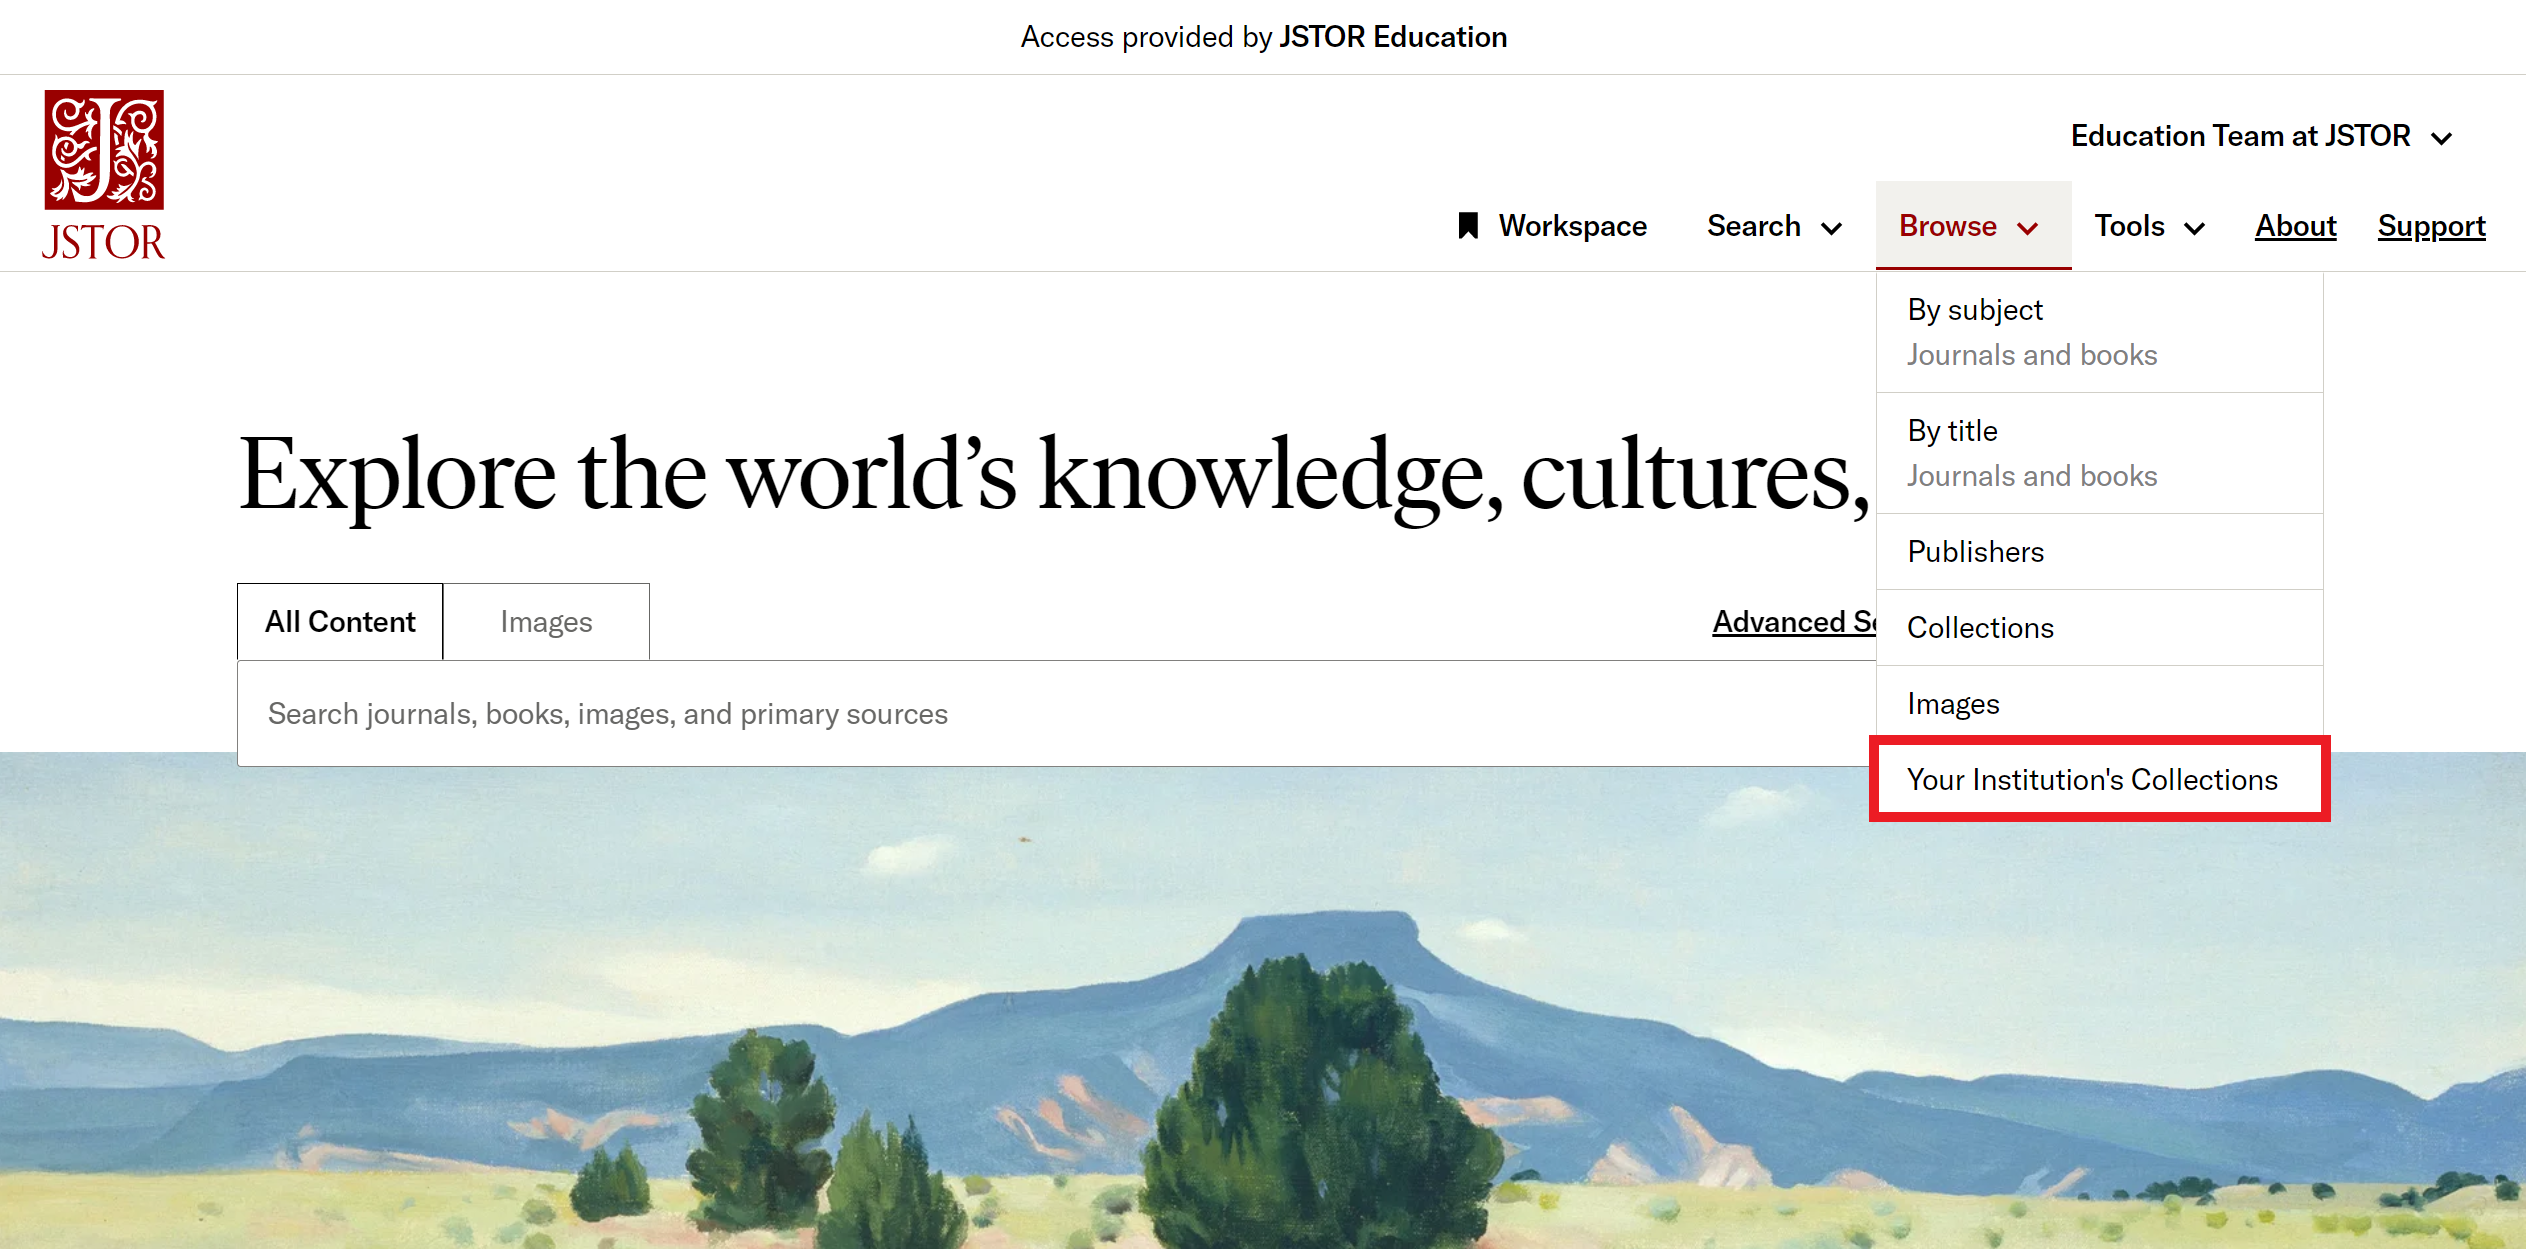 Browse drop-down menu on JSTOR showing Your Institution's Collections option